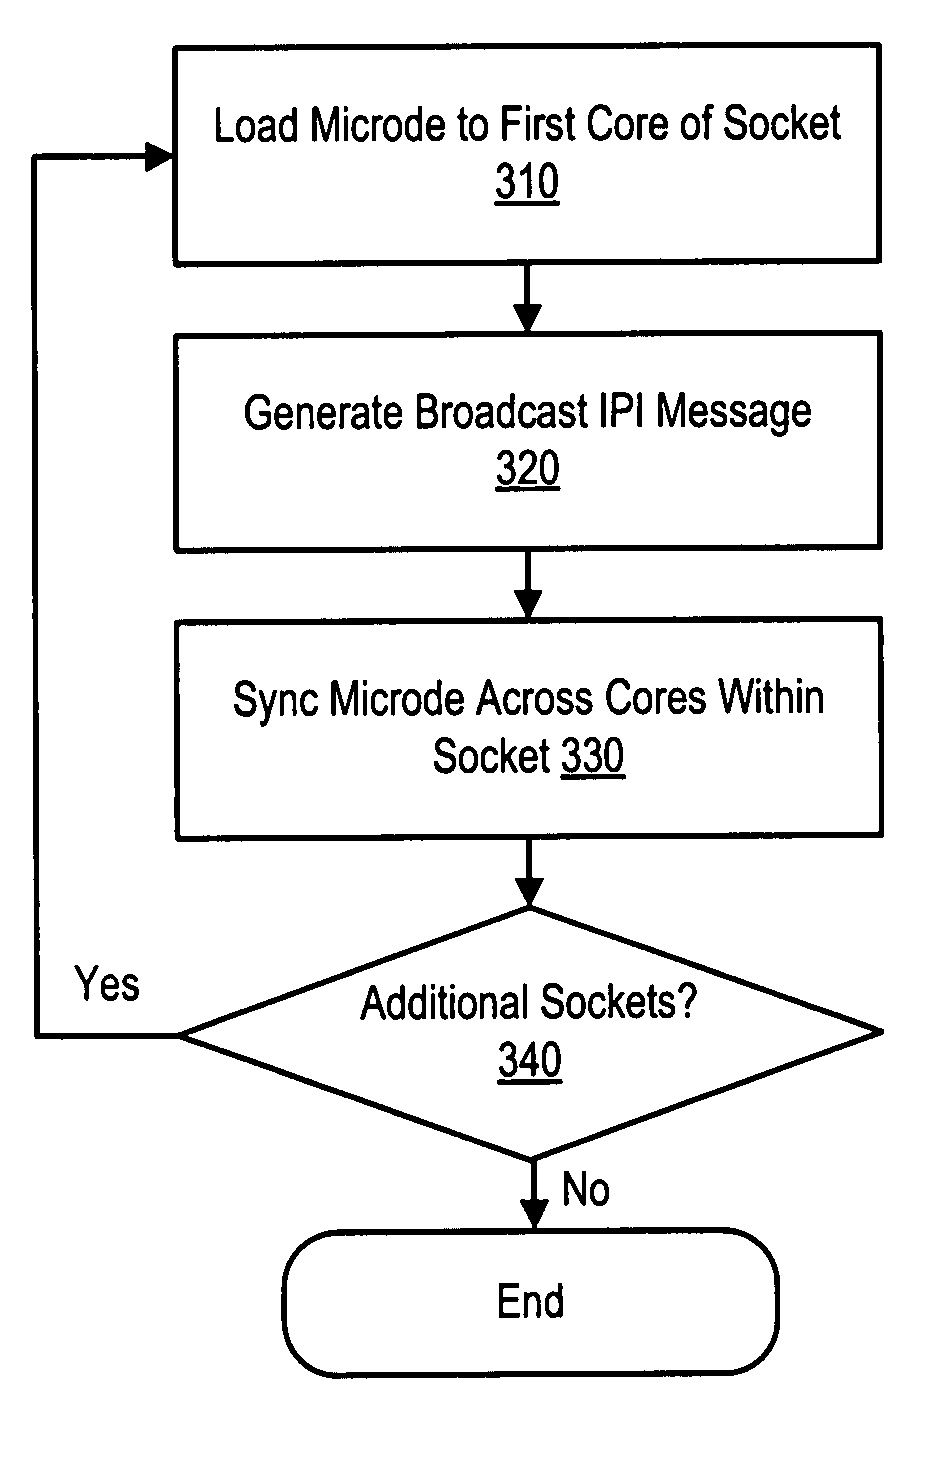 Architectural enhancements to CPU microcode load mechanism using inter processor interrupt messages